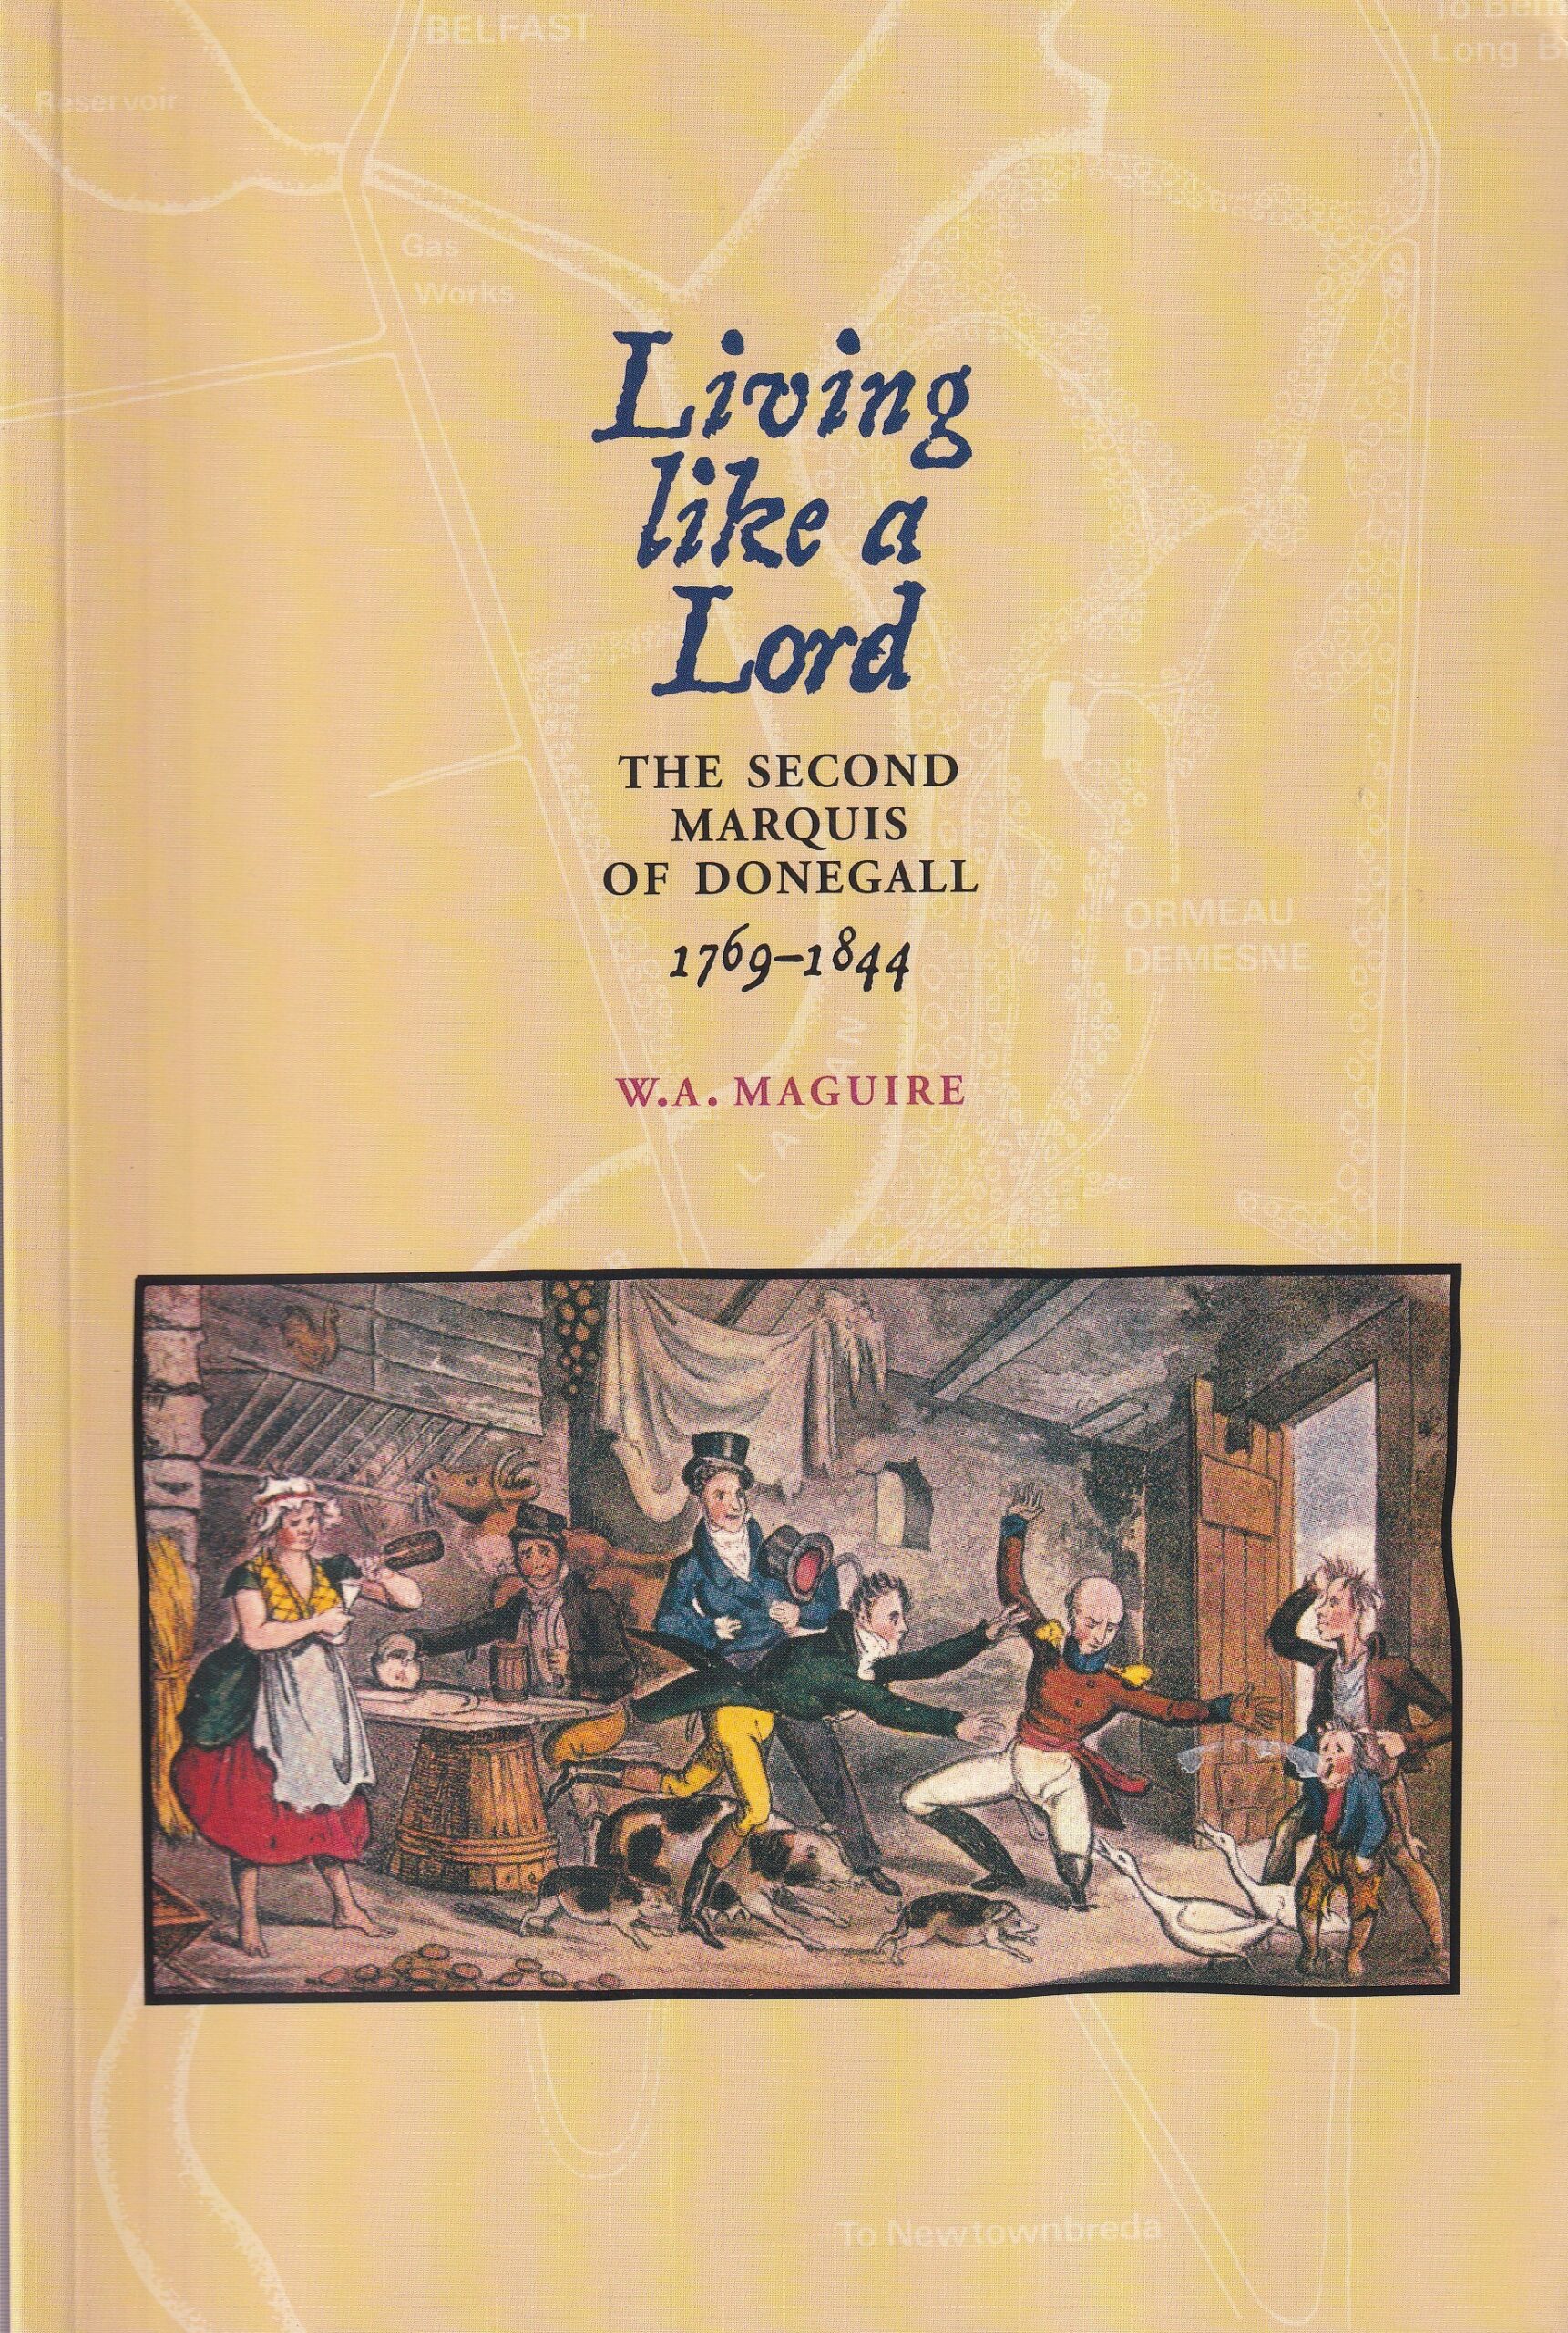 Living Like a Lord: The Second Marquis of Donegall 1769-1844 by W.A. Maguire